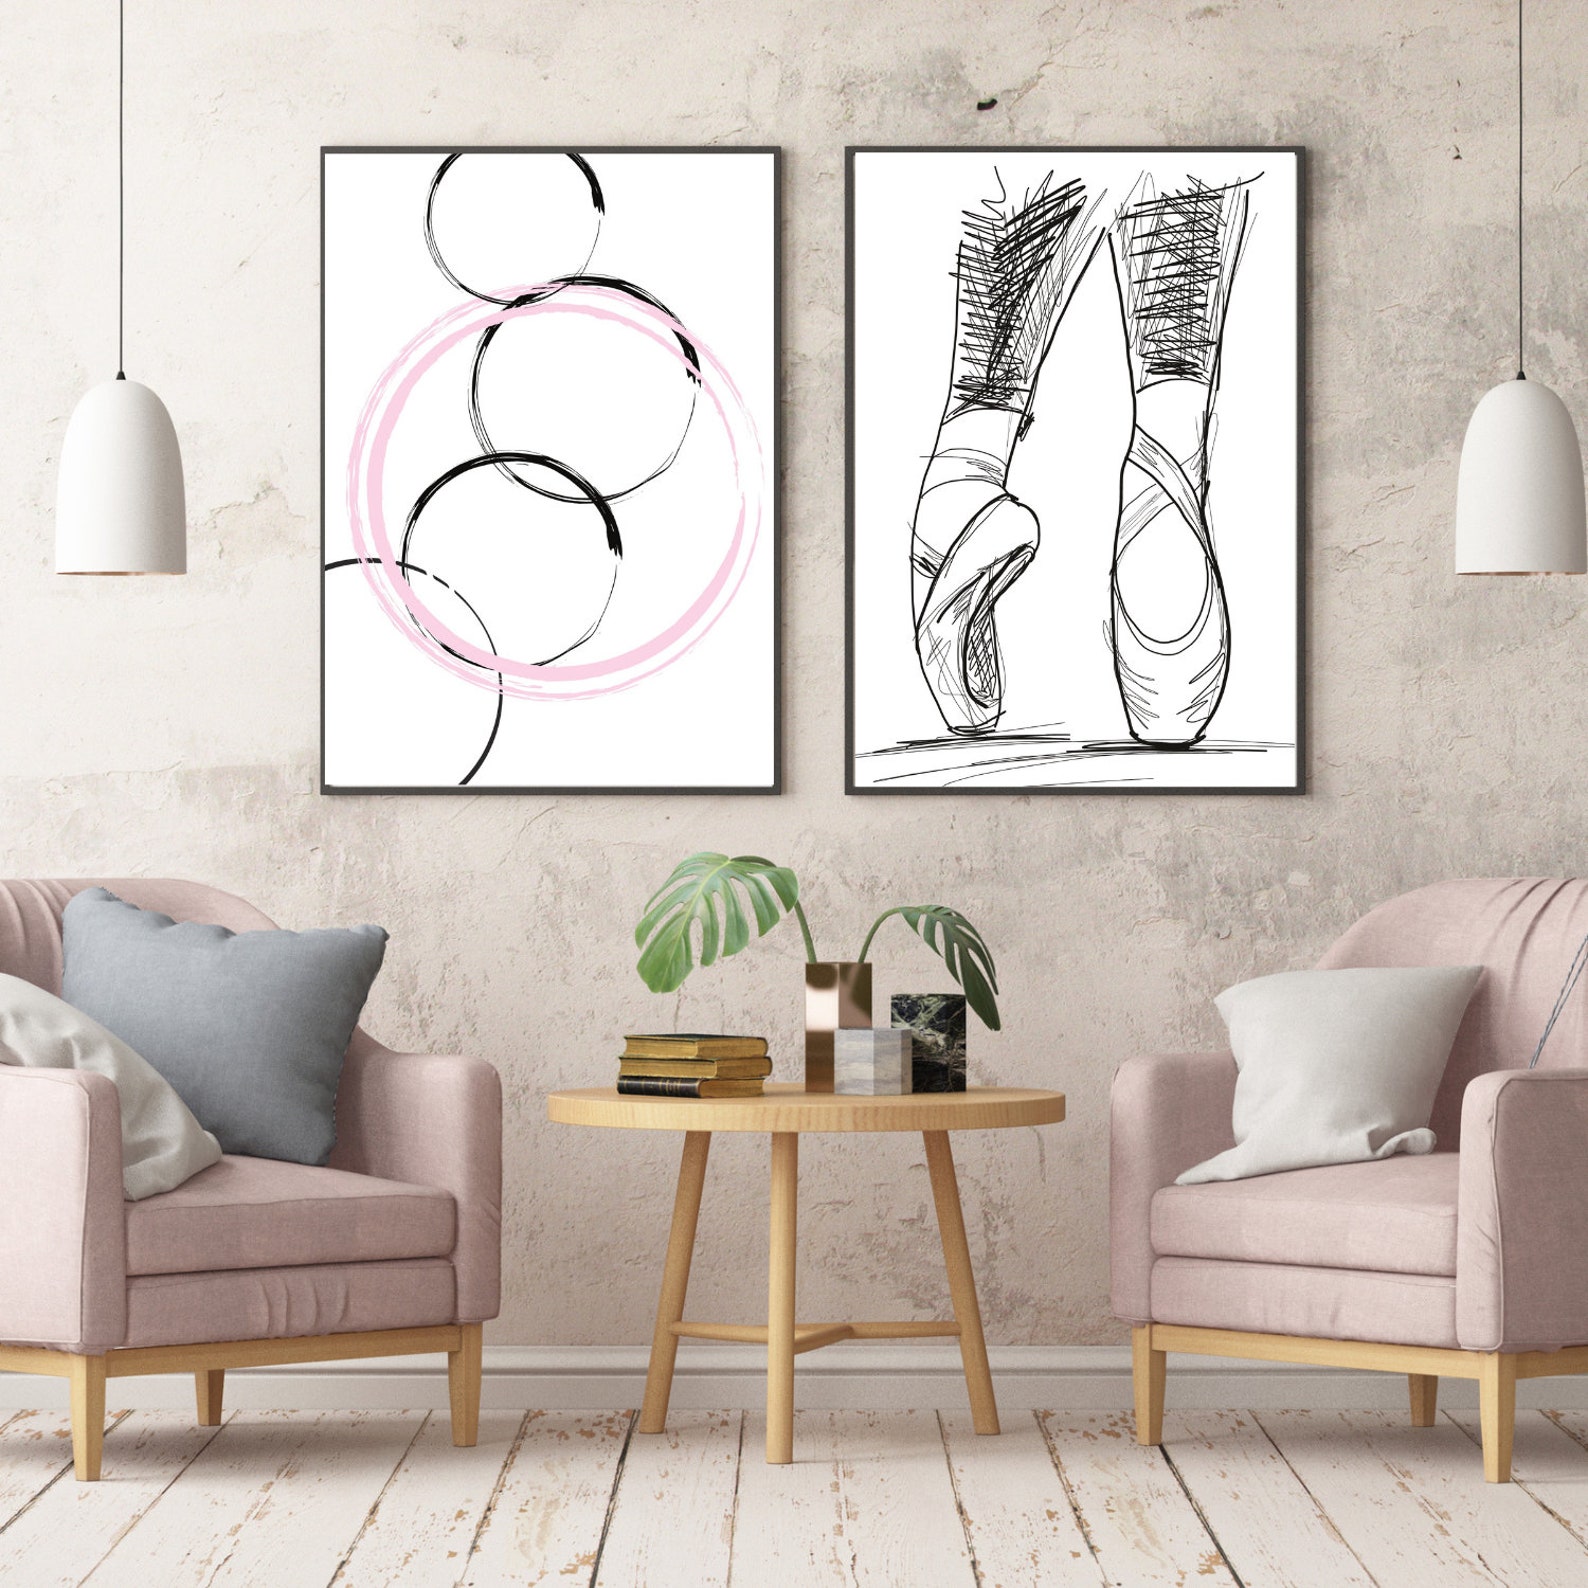 ballet shoes and abstract circles prints ~ set of 2 prints~instant download~large wall art~bed room and living room decor~ballet